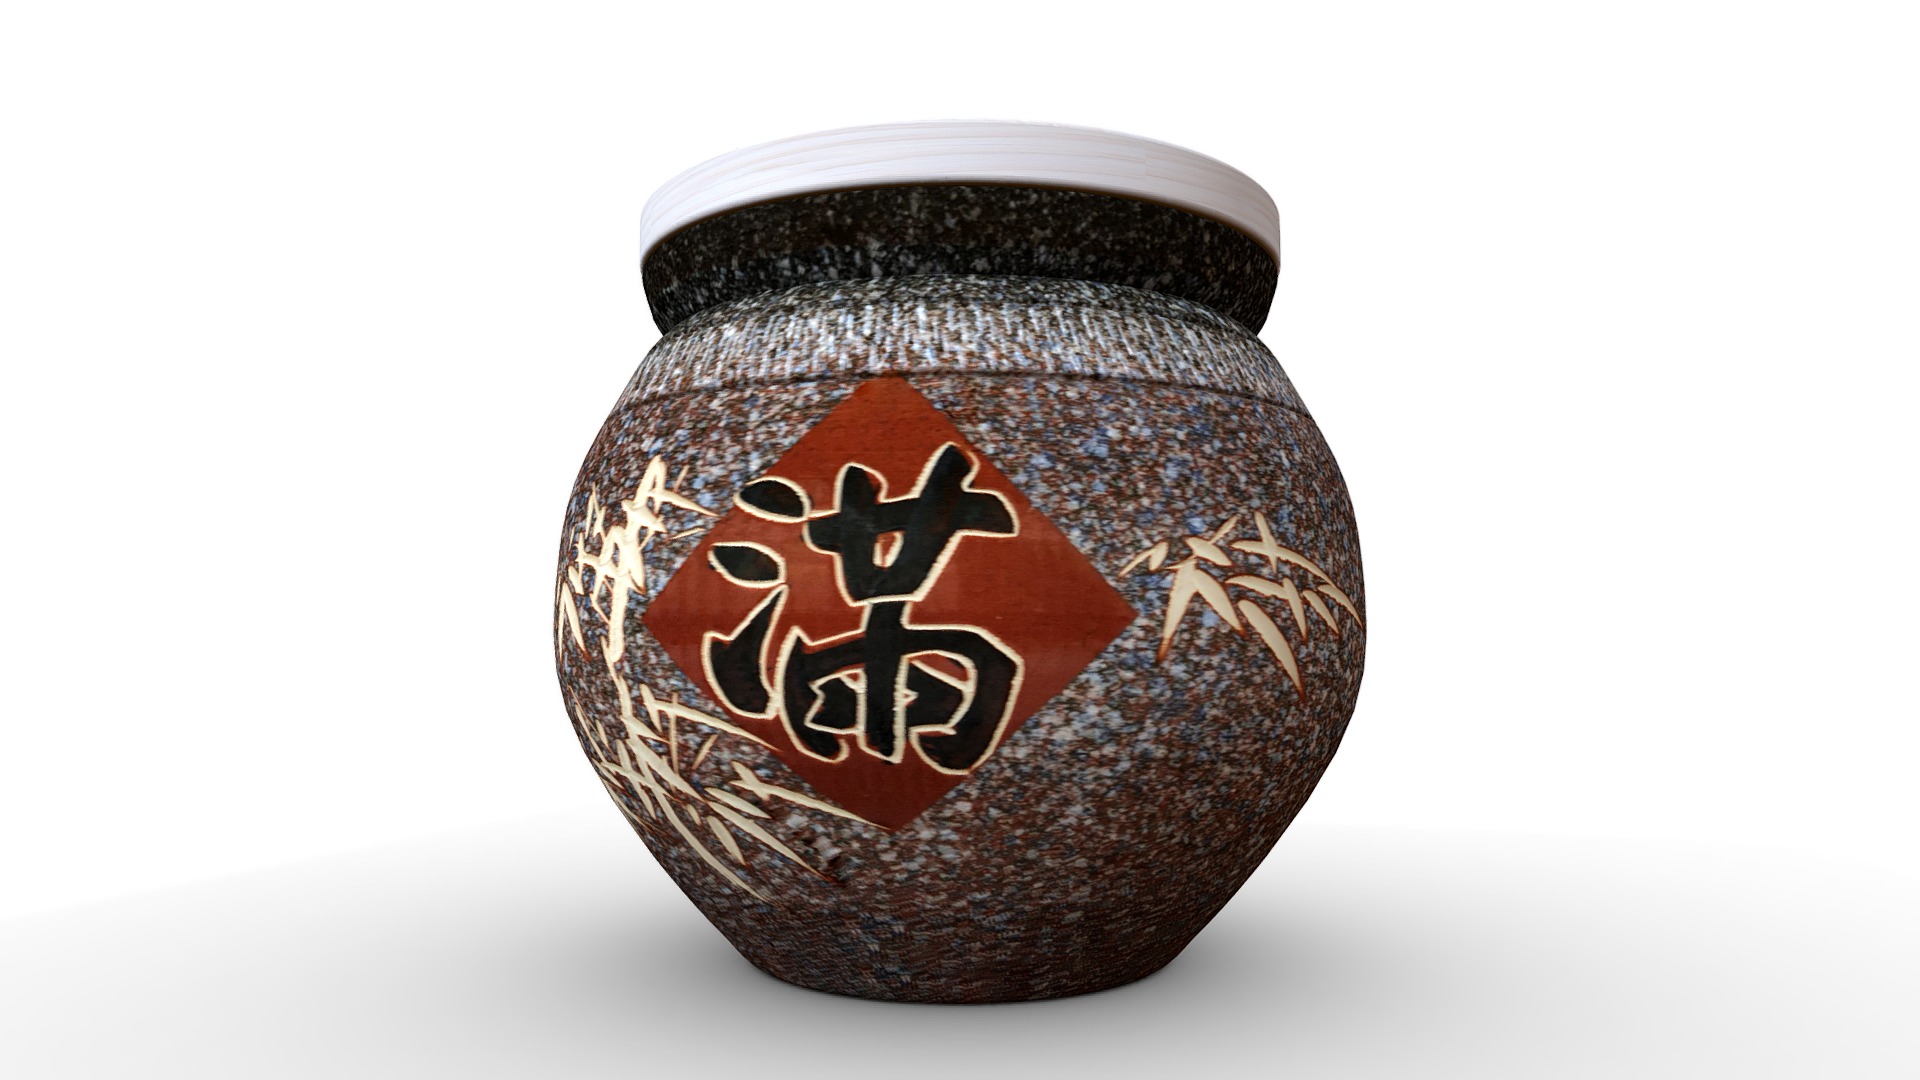 3D model 【3D模擬-上等】10斤玫瑰色『 滿竹 』米甕展示 - This is a 3D model of the 【3D模擬-上等】10斤玫瑰色『 滿竹 』米甕展示. The 3D model is about a close-up of a jar.